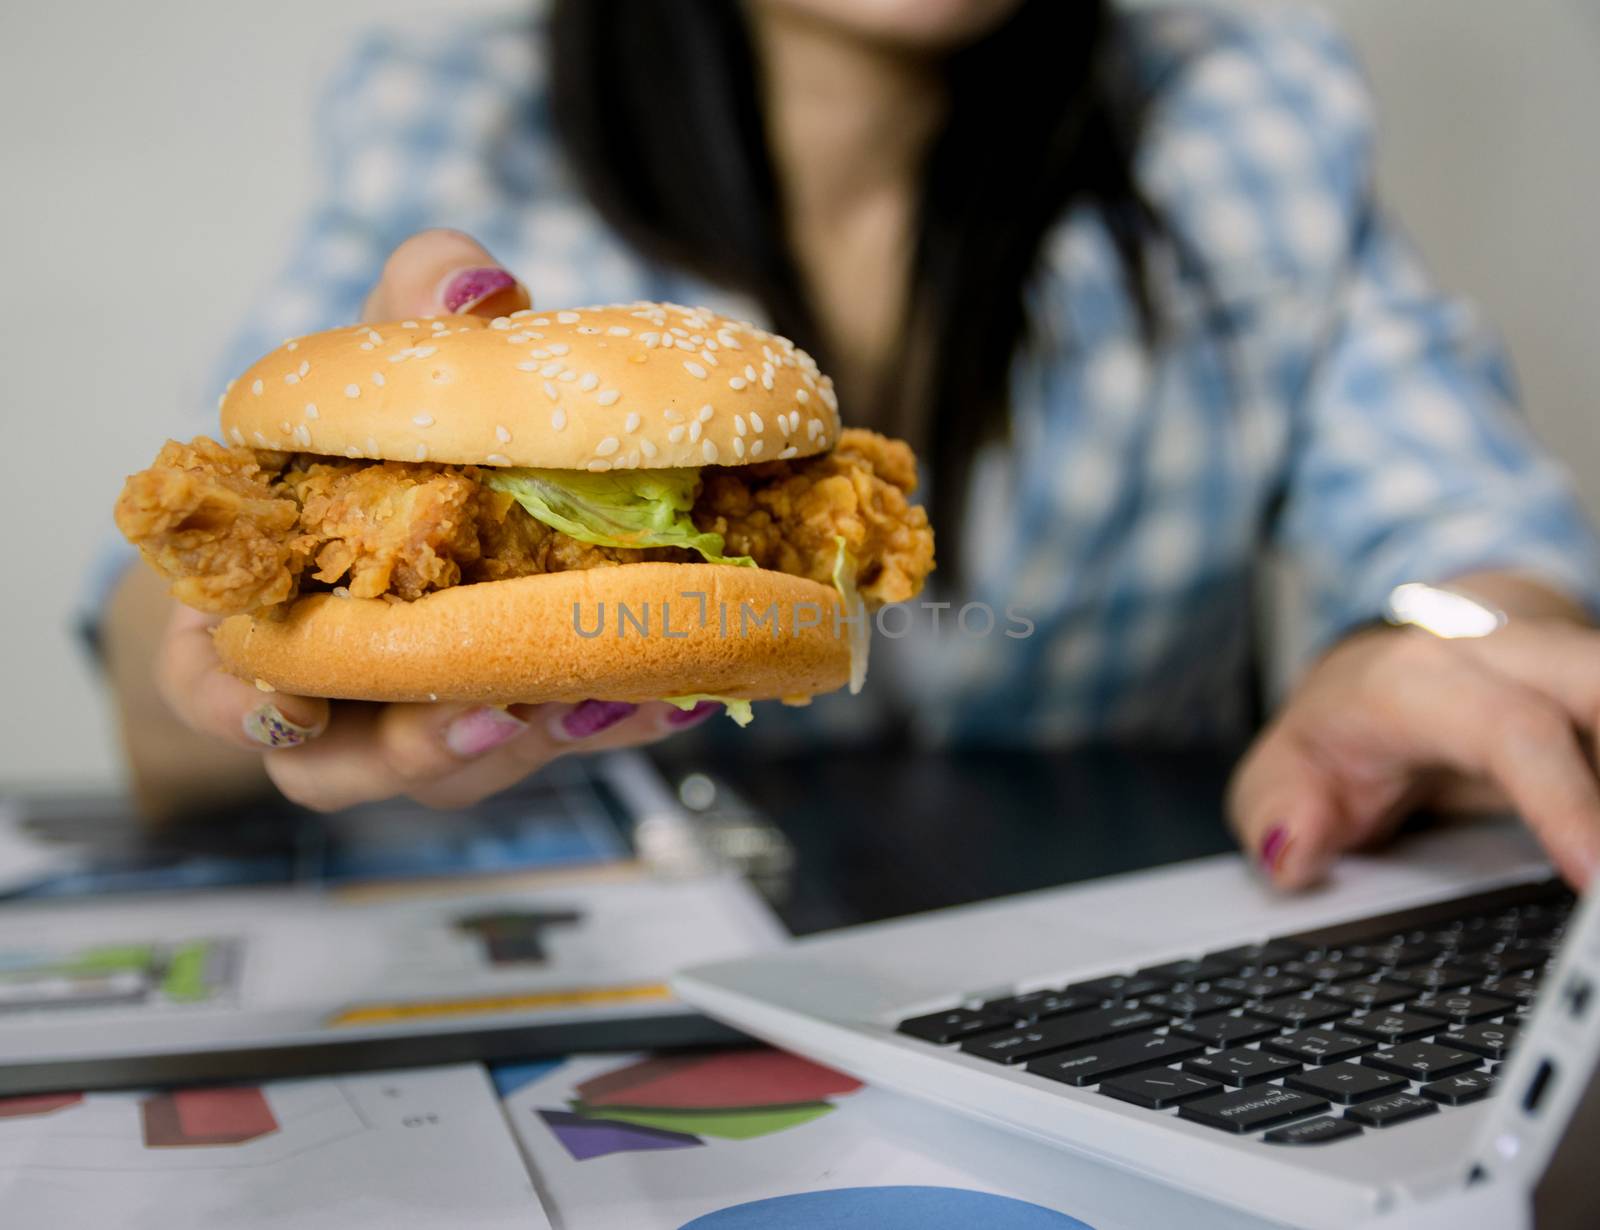 Women work and eat hamburgers to eat lunch in office